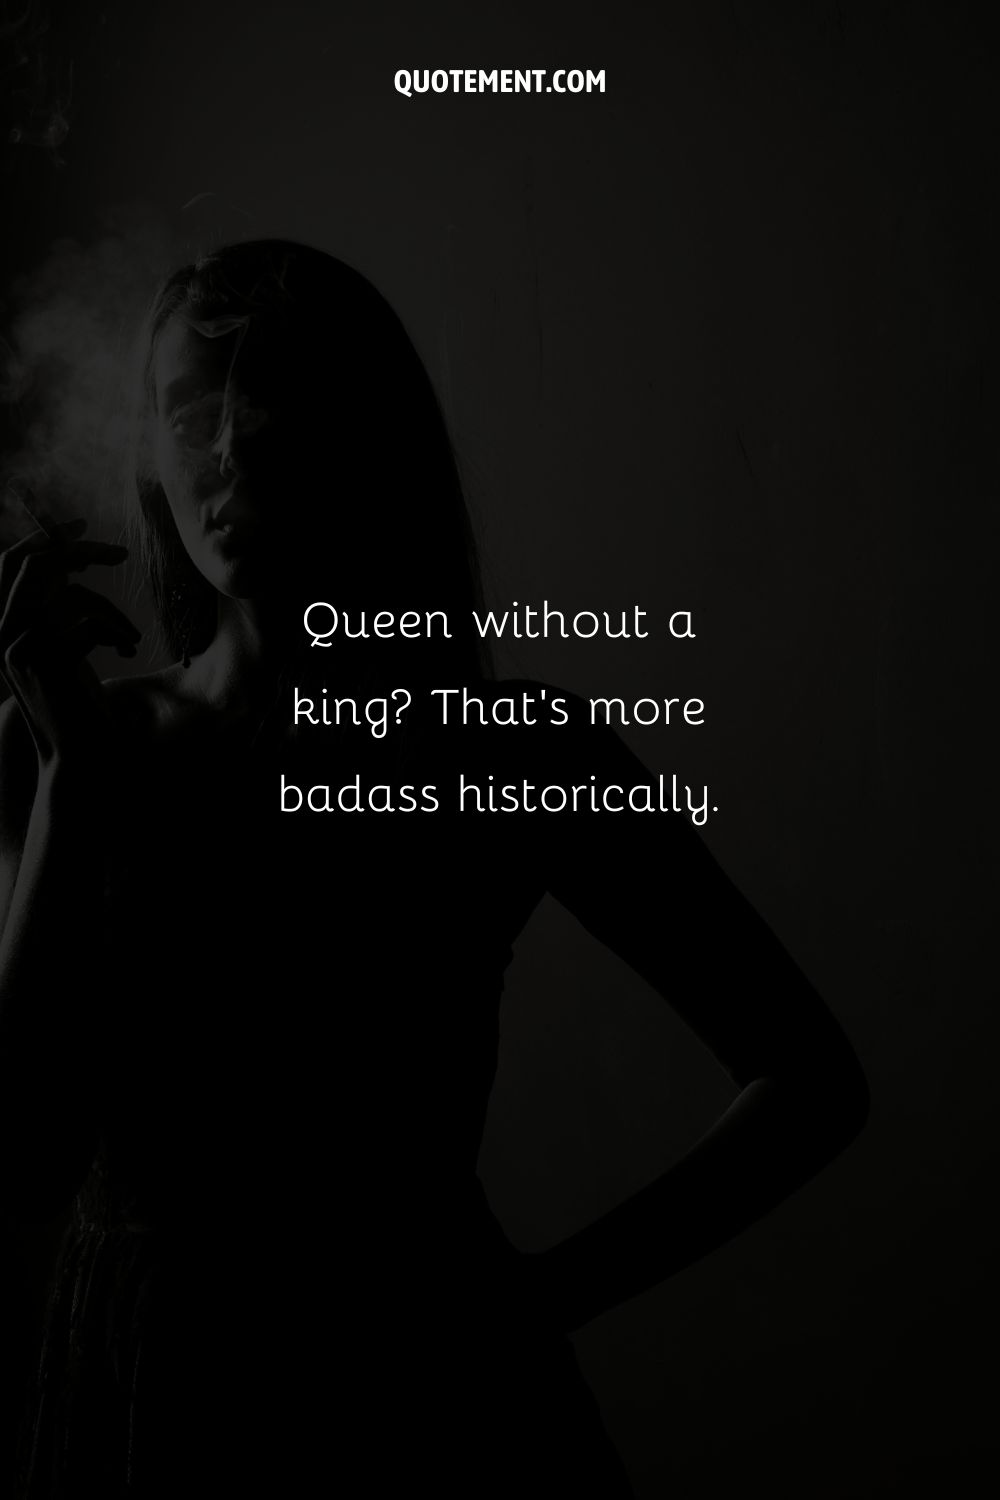 Image of a girl with a cigarette representing a bad bitch caption.